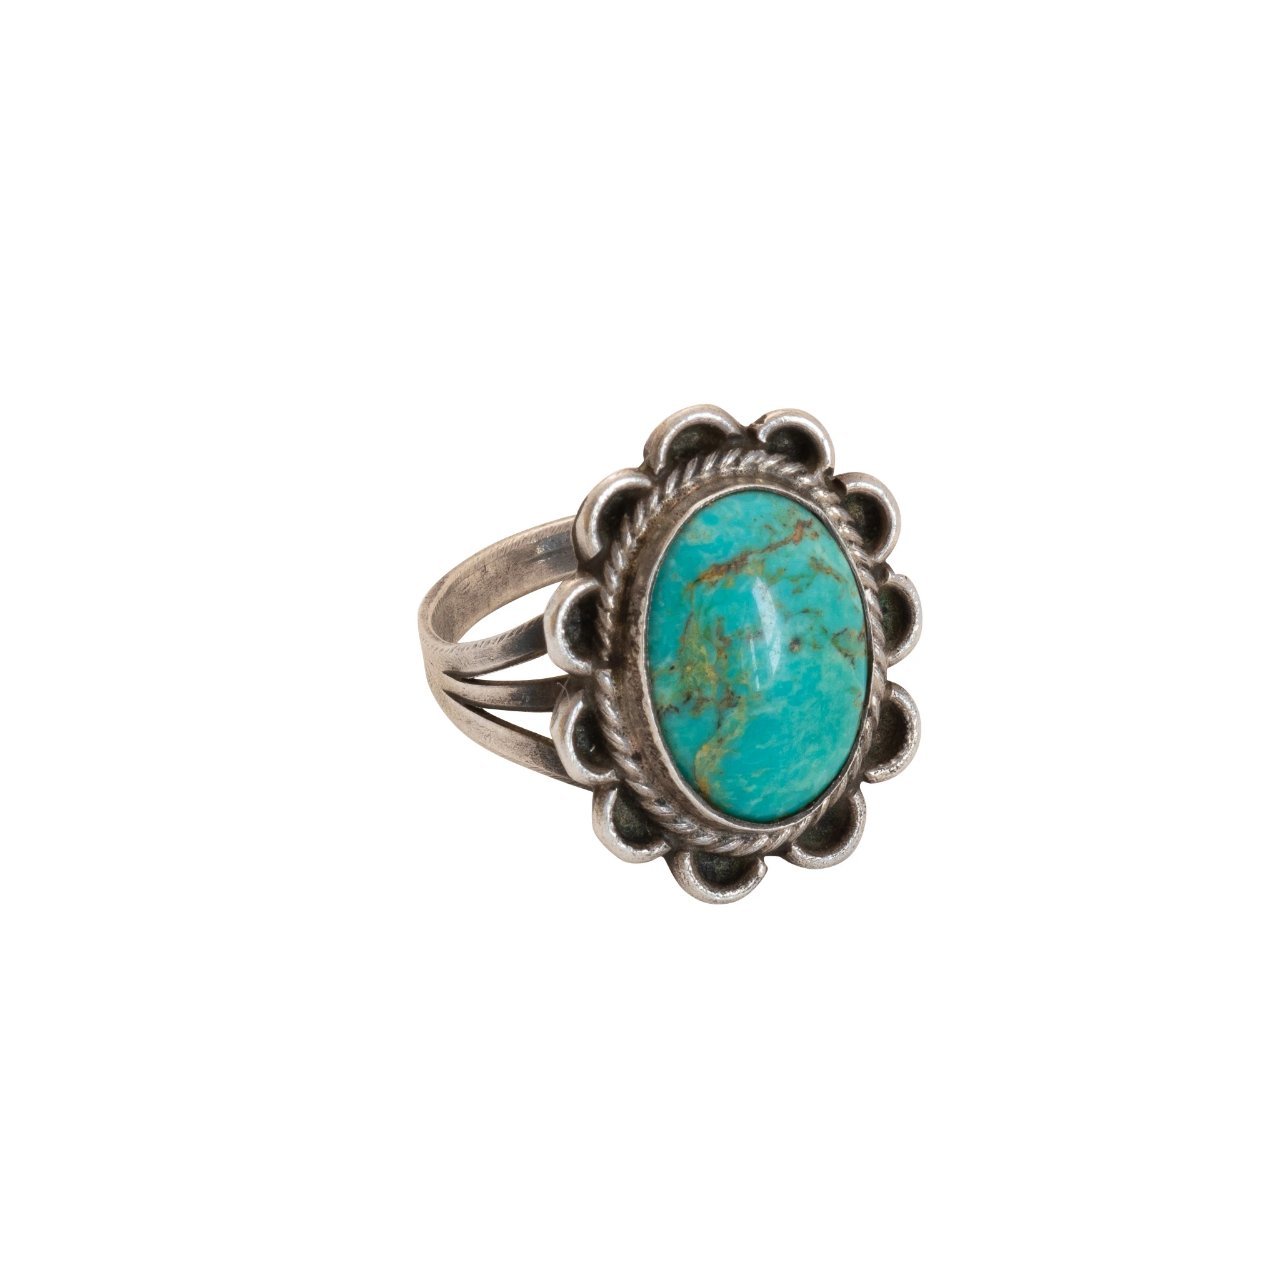 Vintage Navajo Estate Ring Of Turquoise With Silver Scallops - Turquoise & Tufa